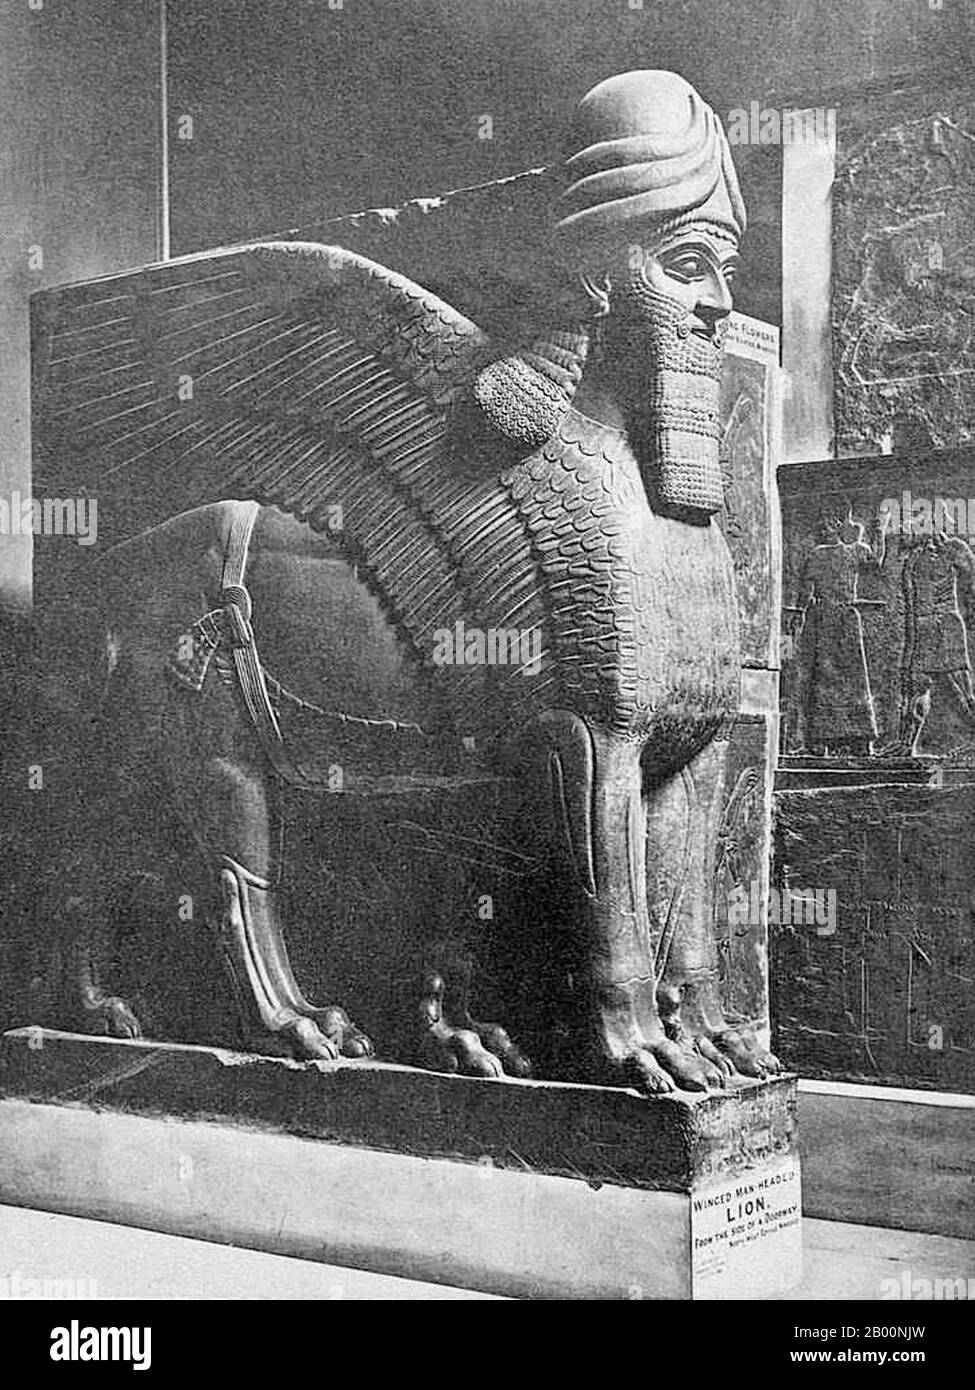 Iraq: Stone portal guardian or Lamassu (mythical winged guardian) from Nimrud, Assyria; statue of a lion with wings and head of a bearded man.  Assyrian king Shalmaneser I ordered the founding of Nimrud, which existed for about 1,000 years as the capital in the 13th century BCE. The city gained fame when king Ashurnasirpal II of Assyria (c. 880 BCE) made it his capital. He built a large palace and temples on the site of an earlier city that had long fallen into ruins. Stock Photo